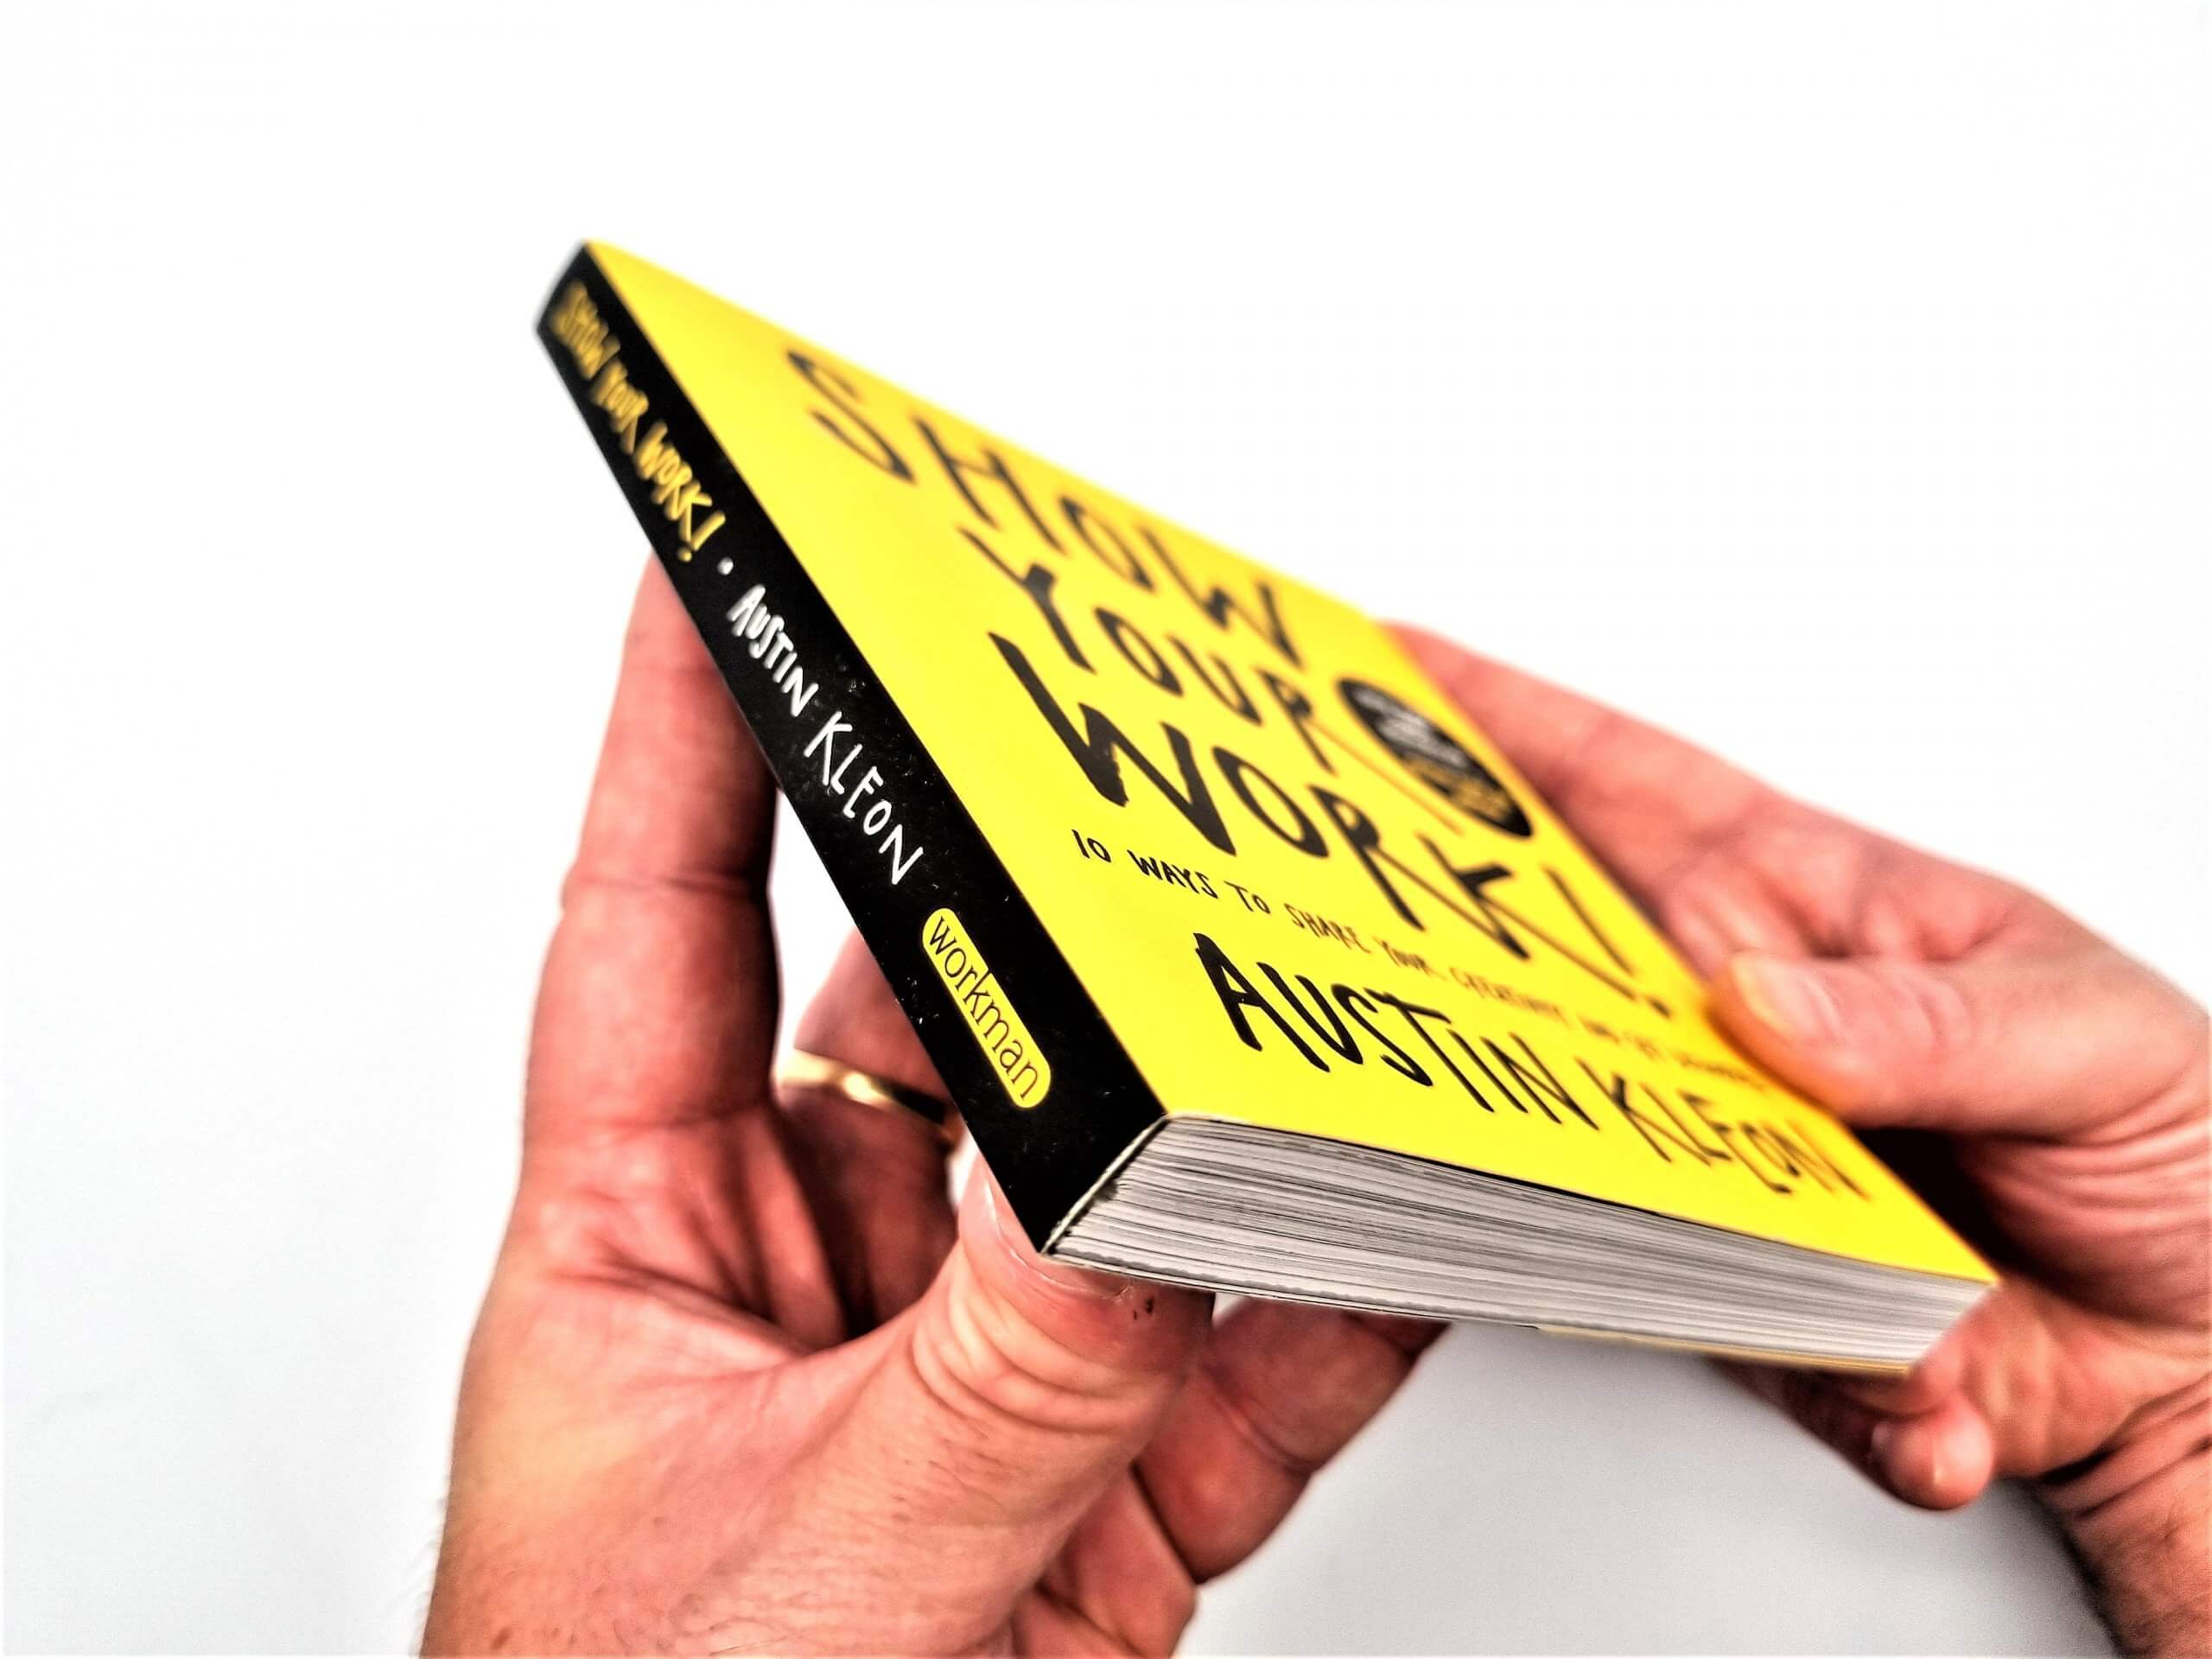 Show Your Work by Austin Kleon - Book Review - The Logo Creative_3